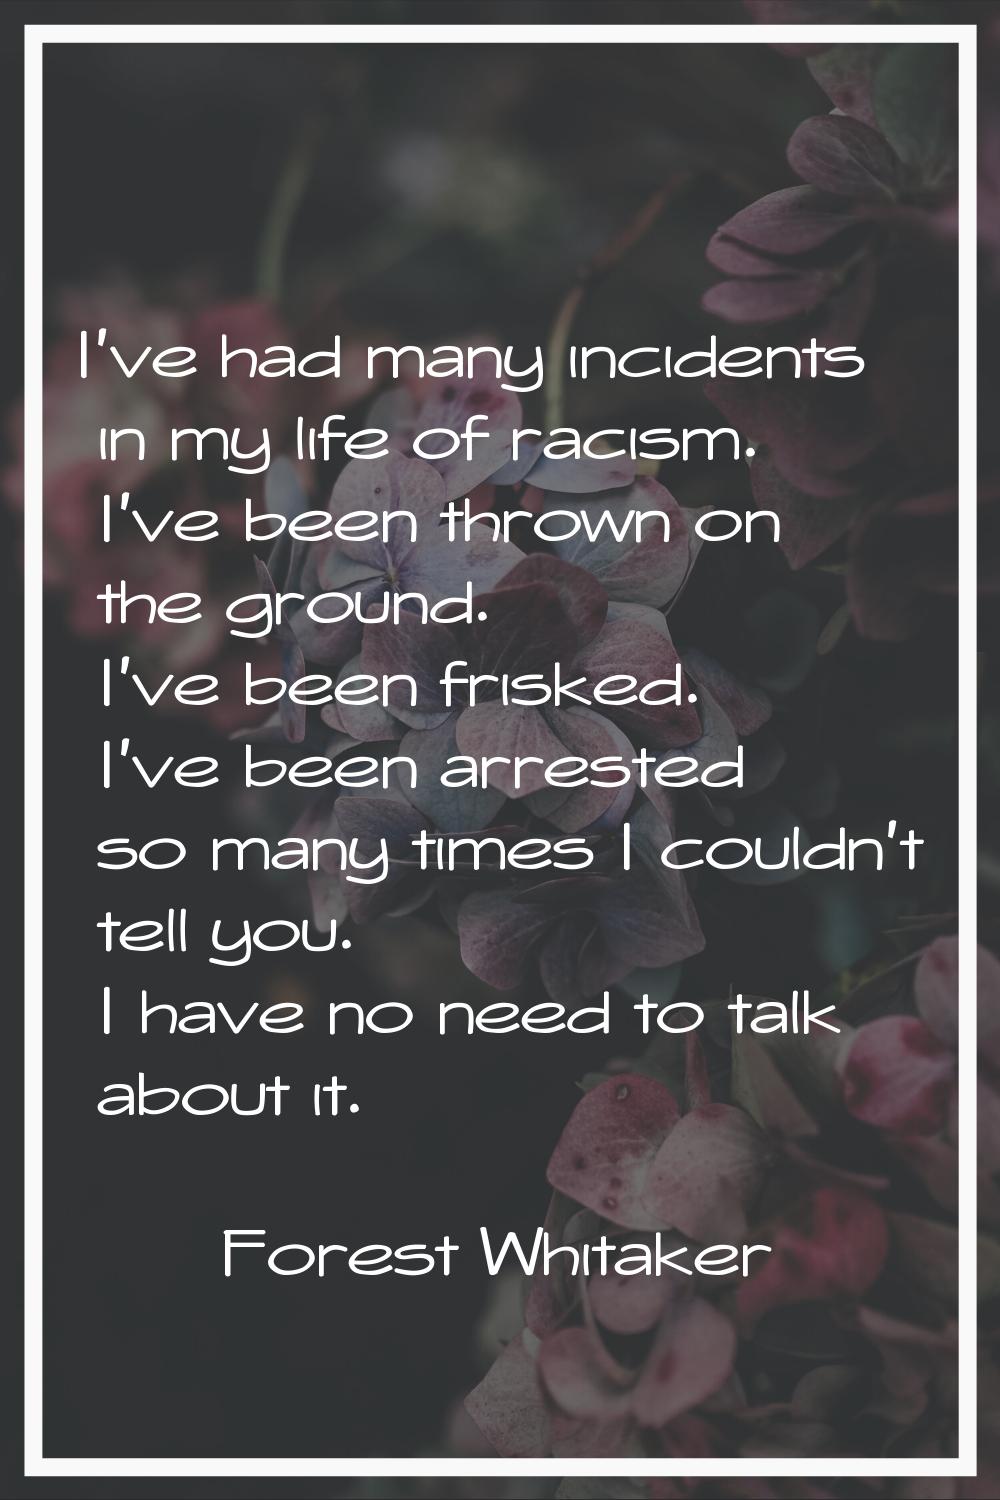 I've had many incidents in my life of racism. I've been thrown on the ground. I've been frisked. I'